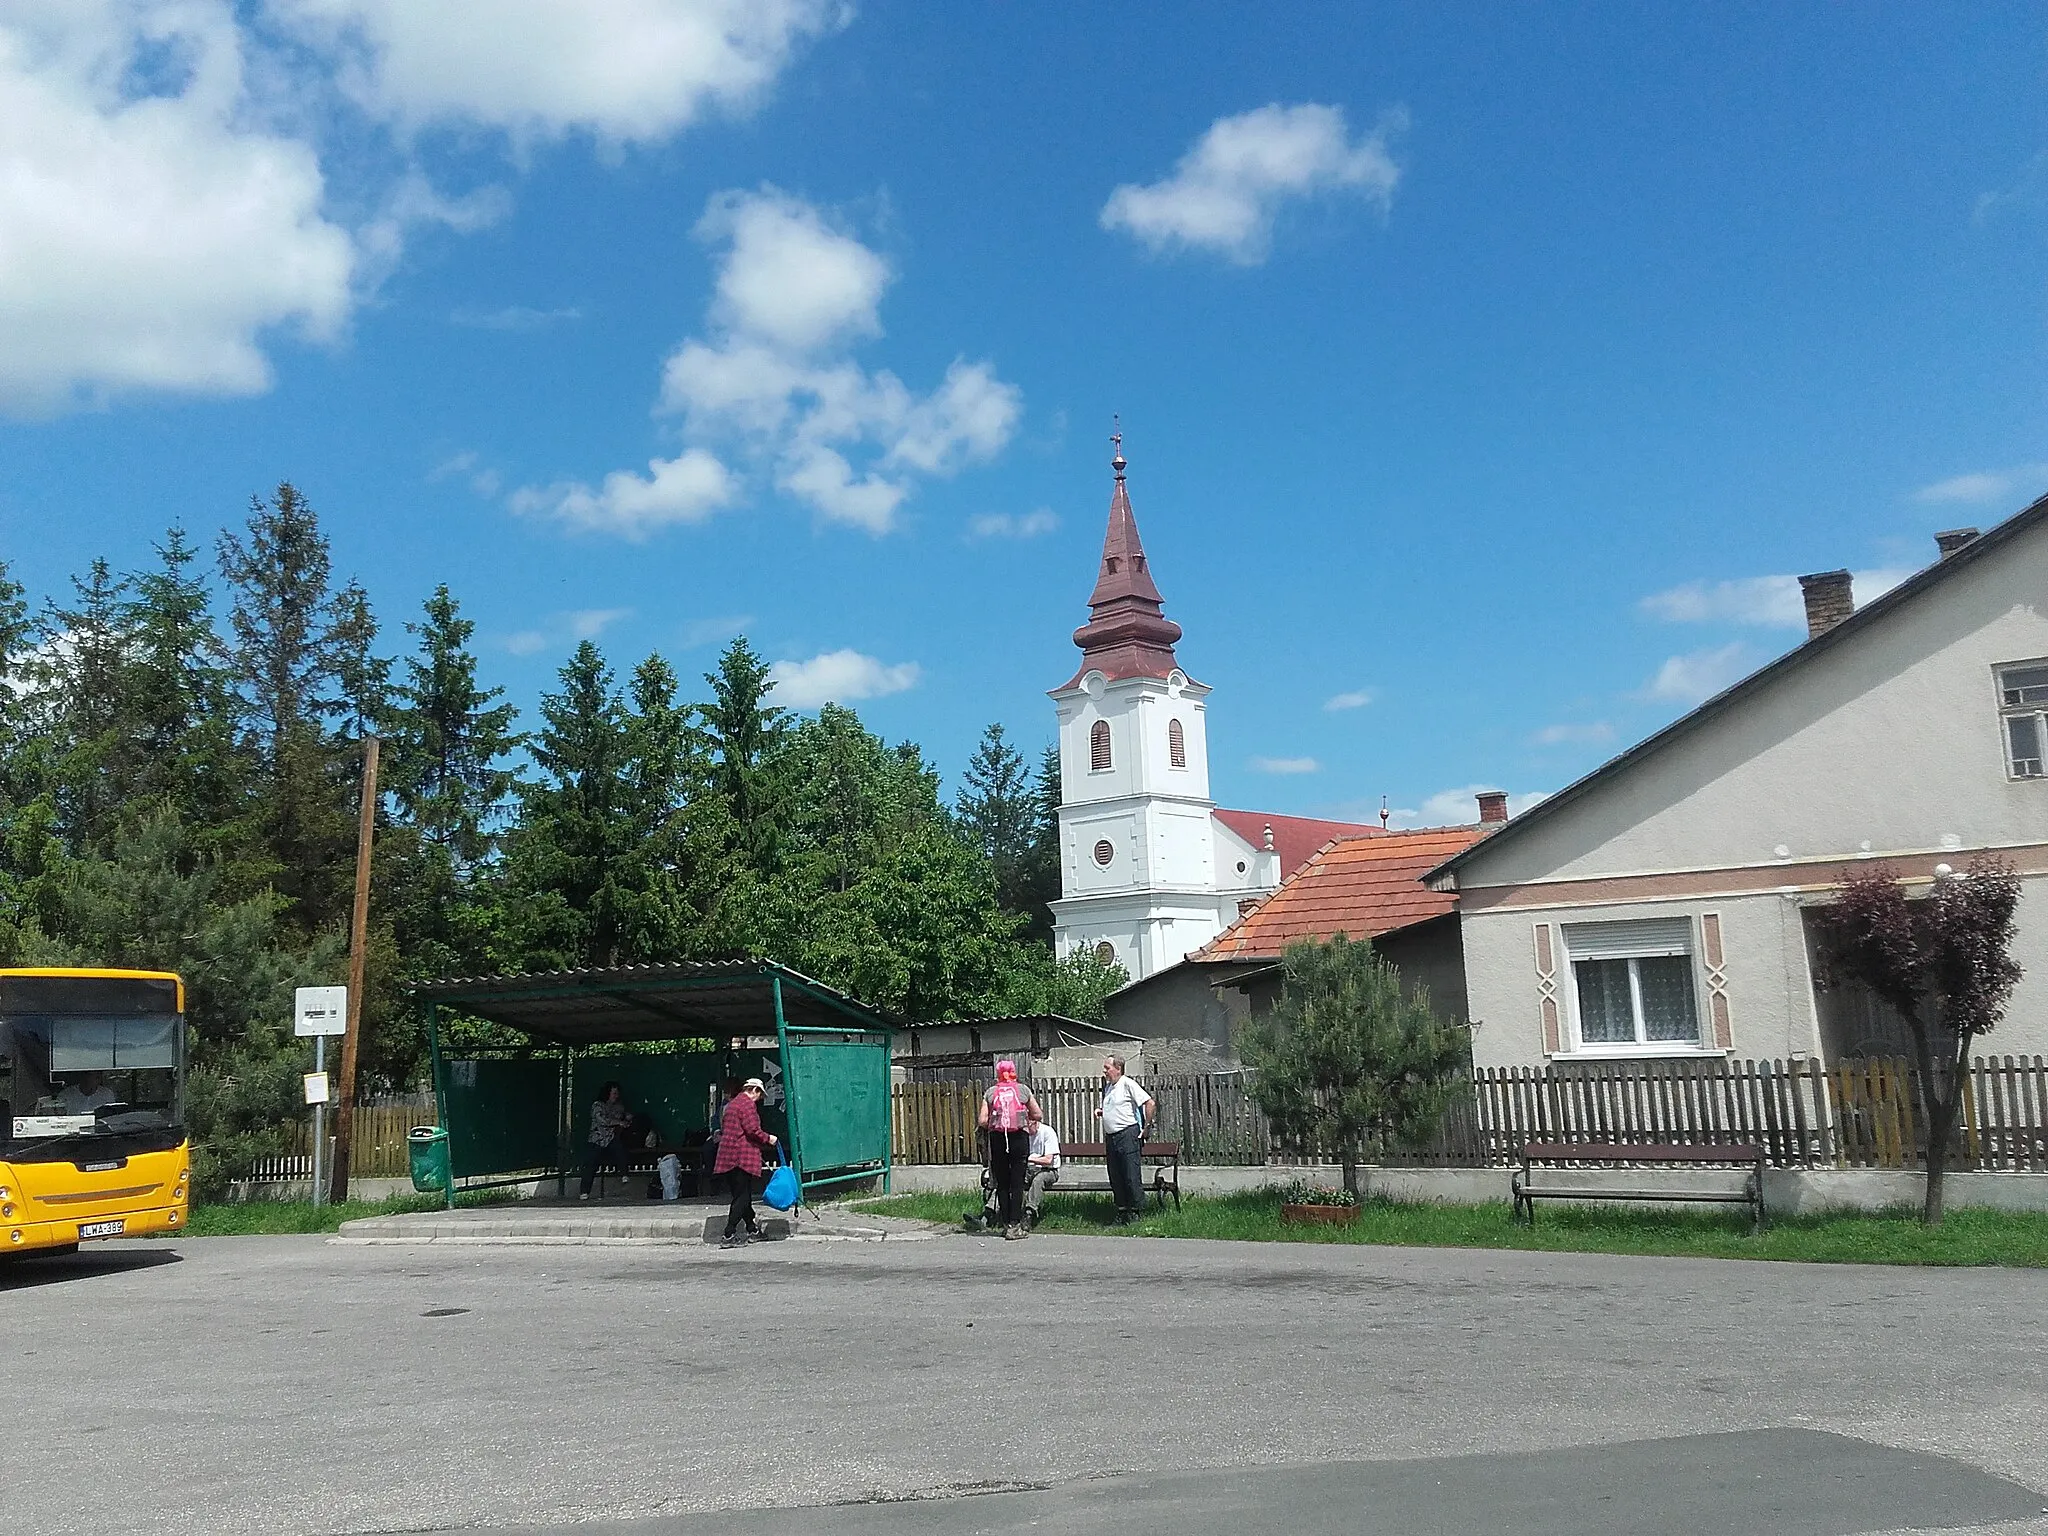 Photo showing: The main square of Varbó, Hungary, with the local Baroque Reformed church, and a bus stop